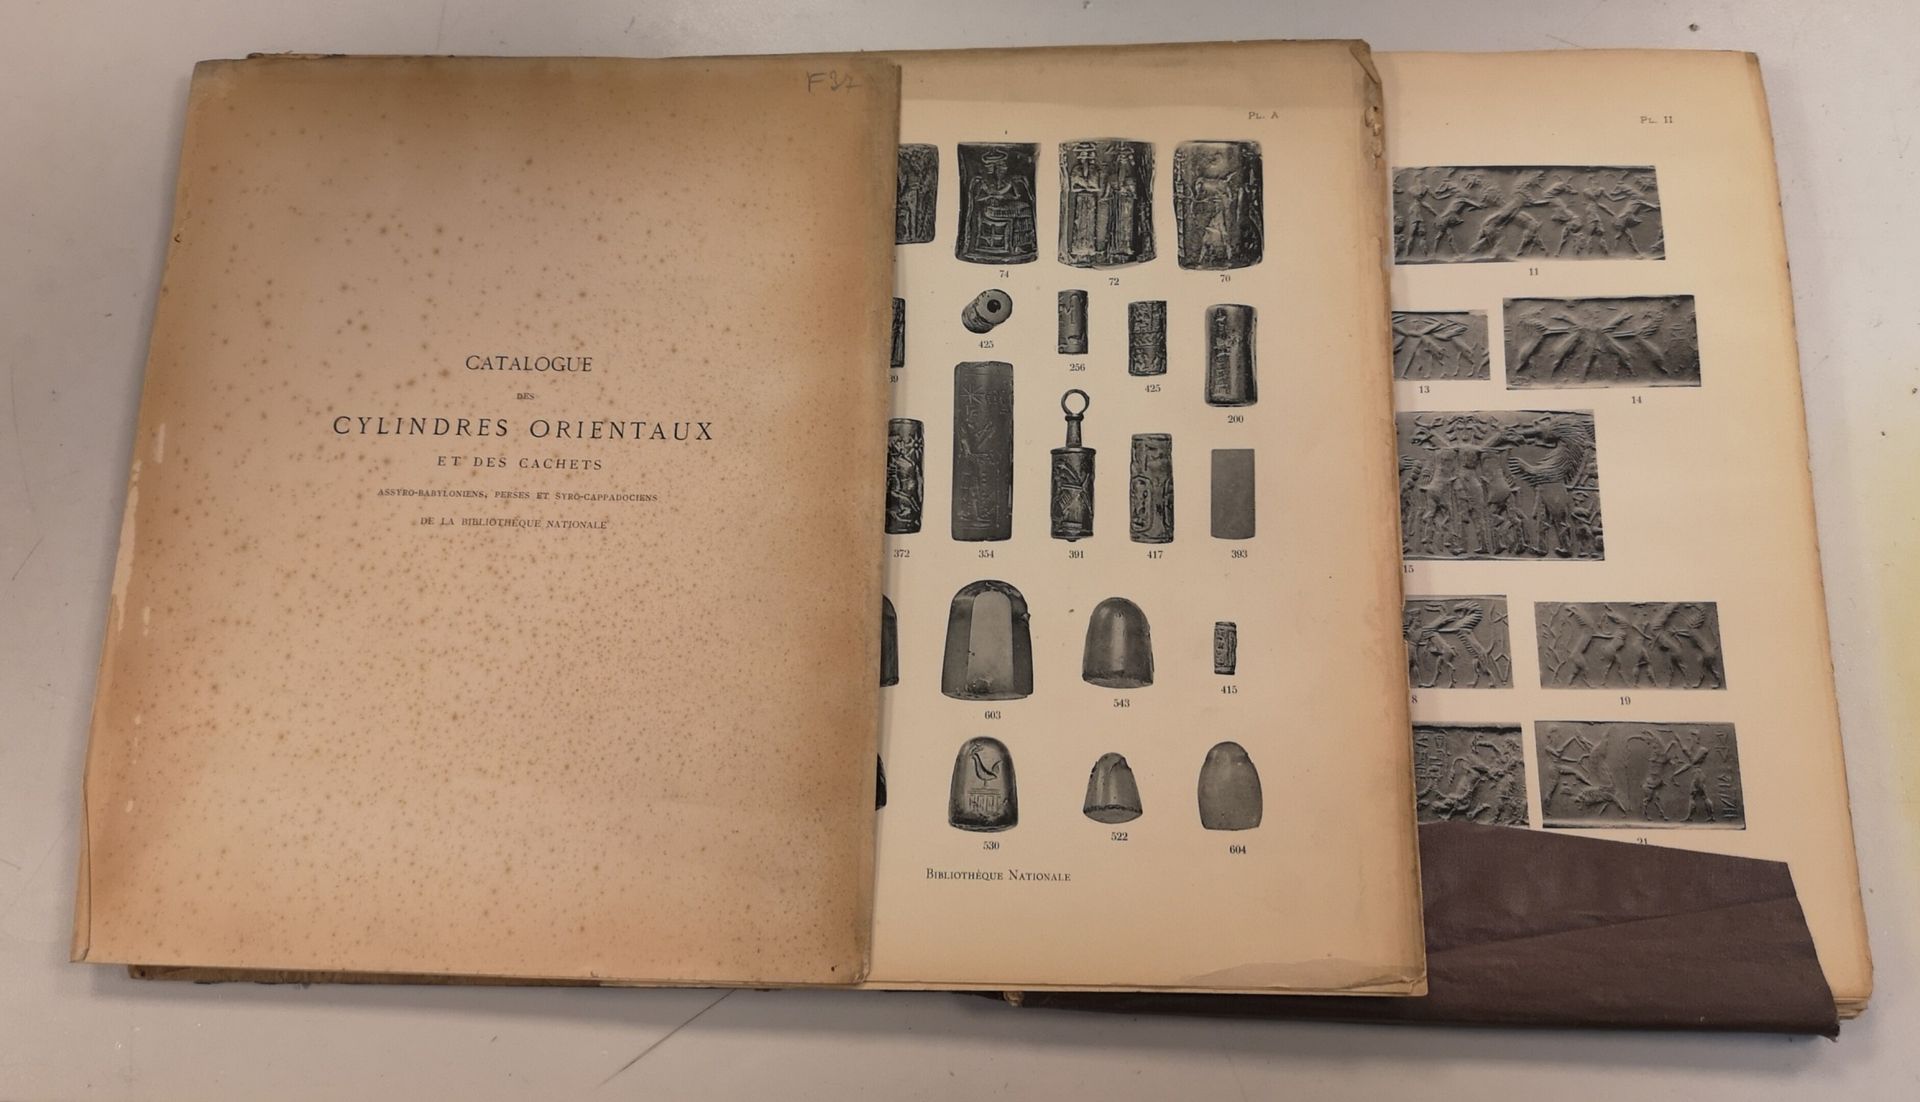 Louis DELAPORTE Eugène PIOT Foundation.

Catalogue of Oriental Cylinders and Ass&hellip;